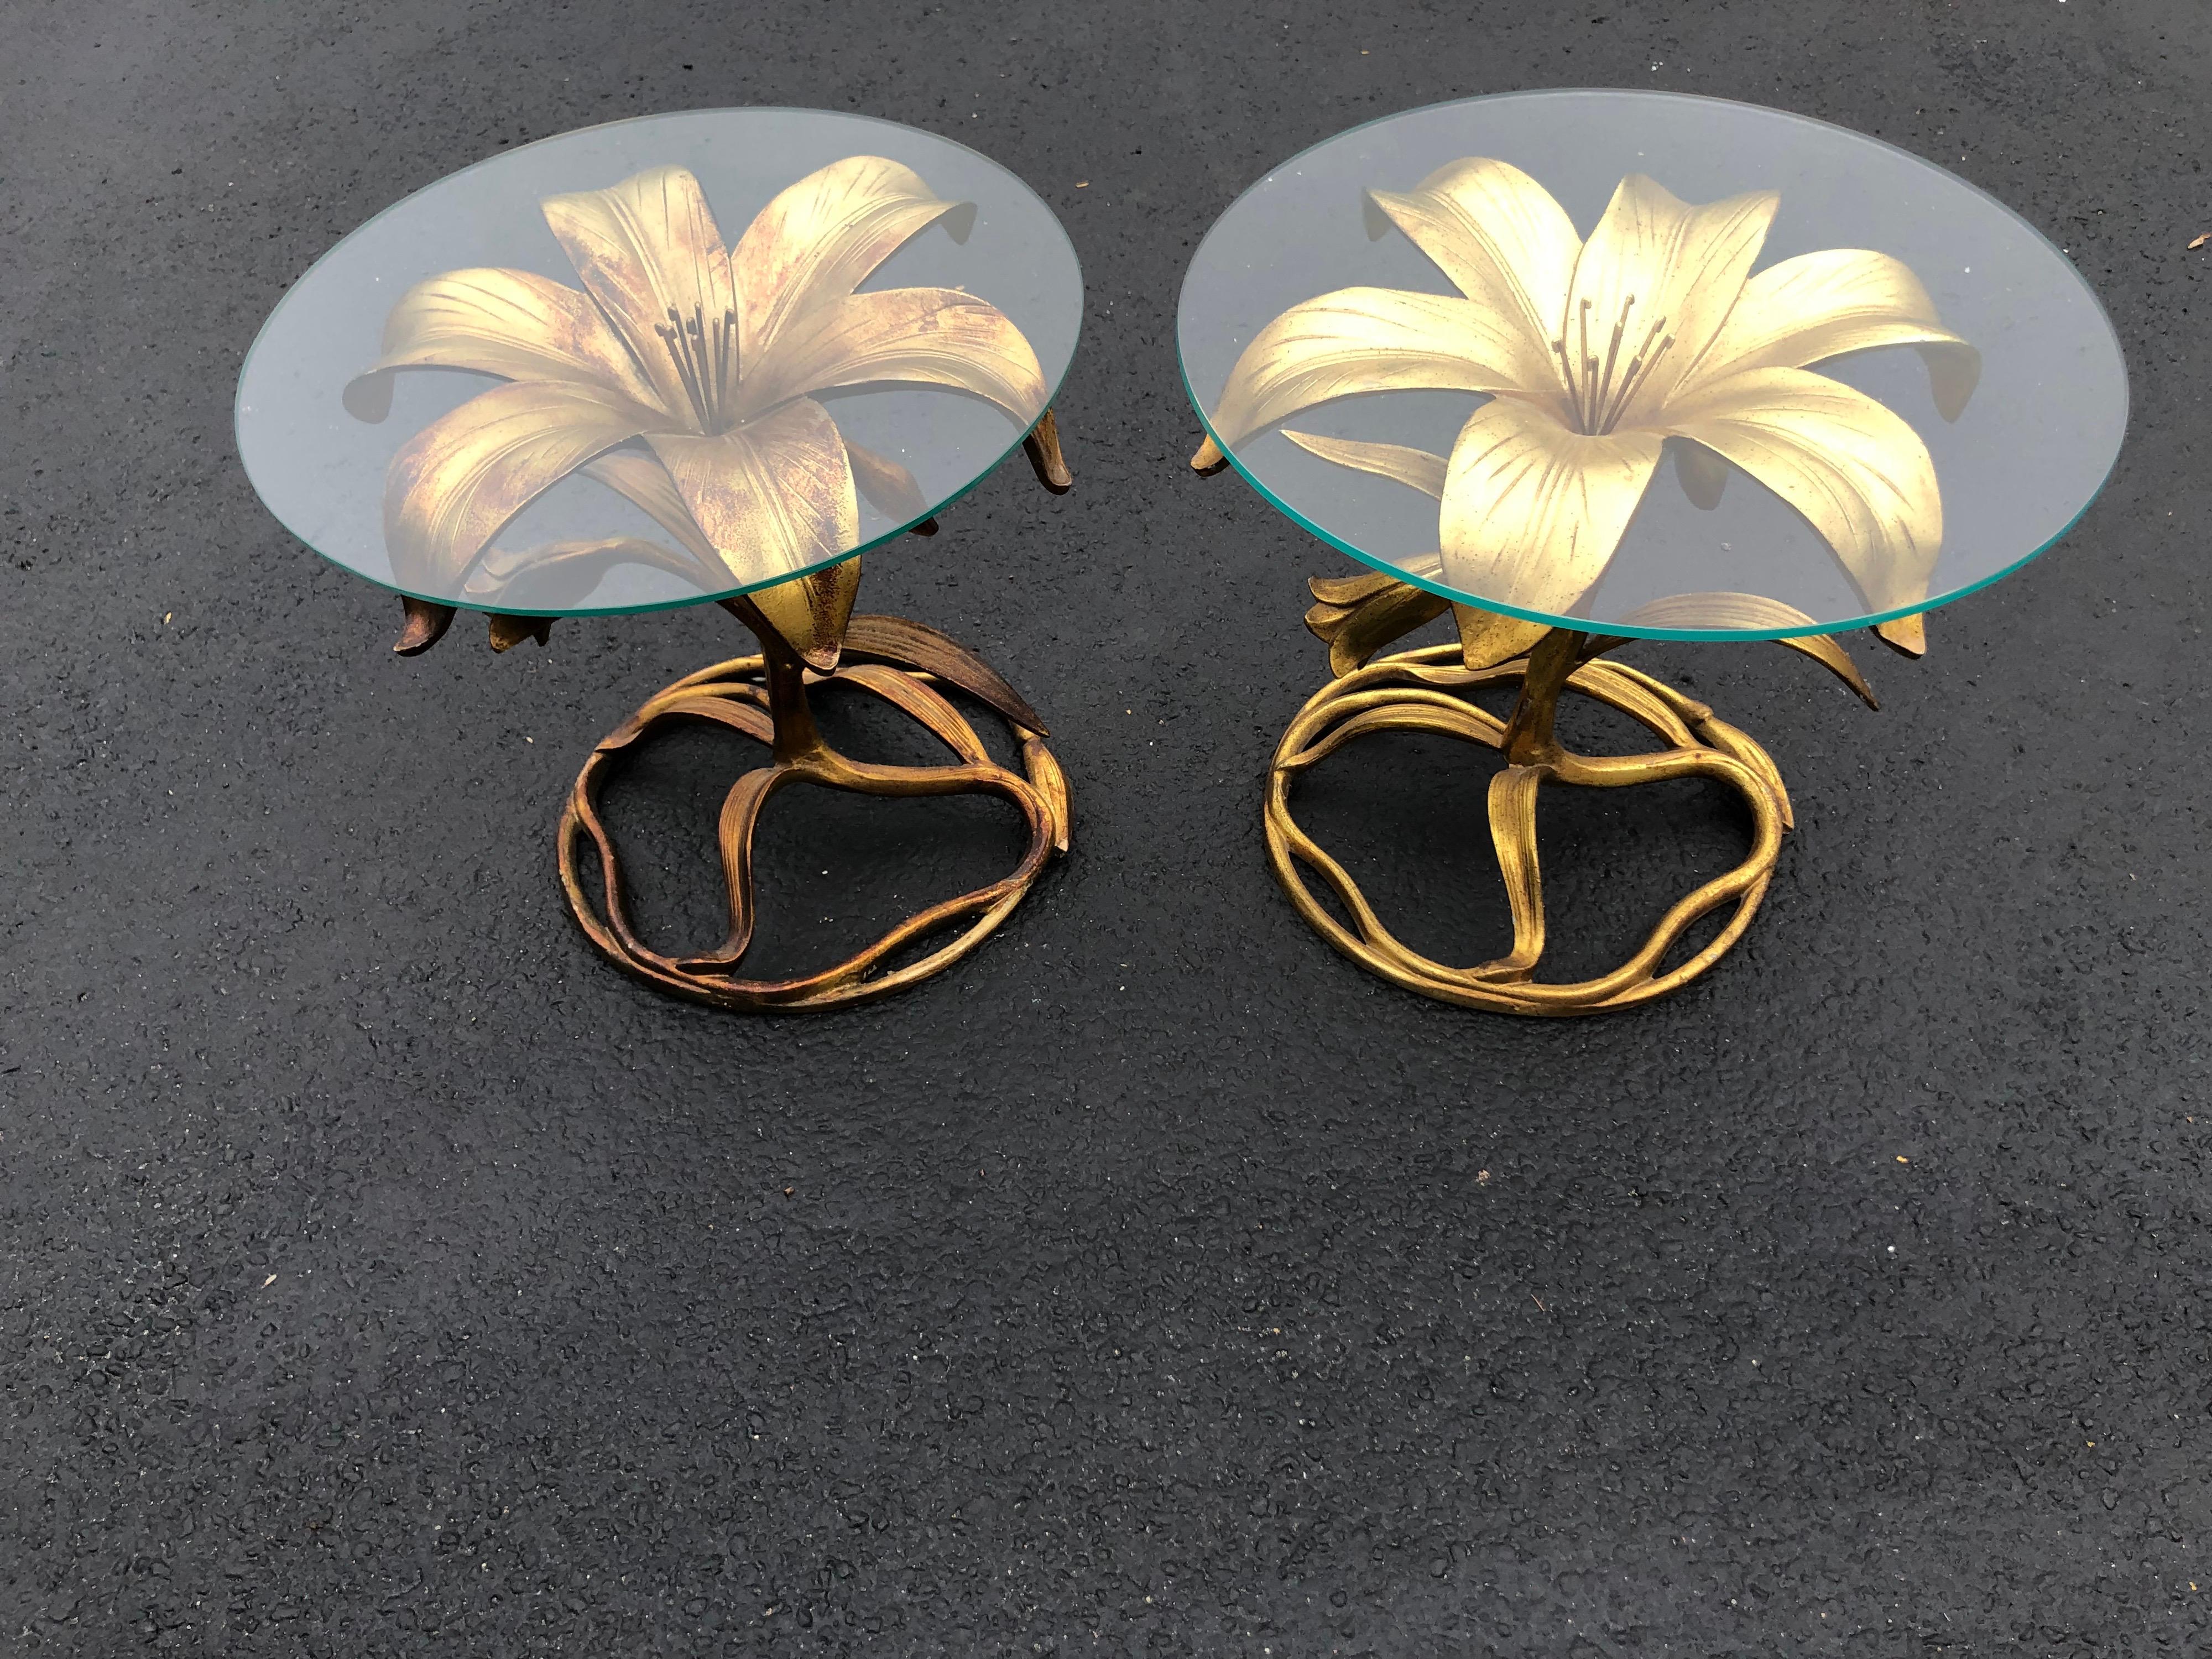 Pair of Arthur Court gilt Lily tables. These each have round tops and a gilt aluminum base. There are variations to the tone and gilding on each table. They are not completely identical in tone but have variation. Some of the gilding has become